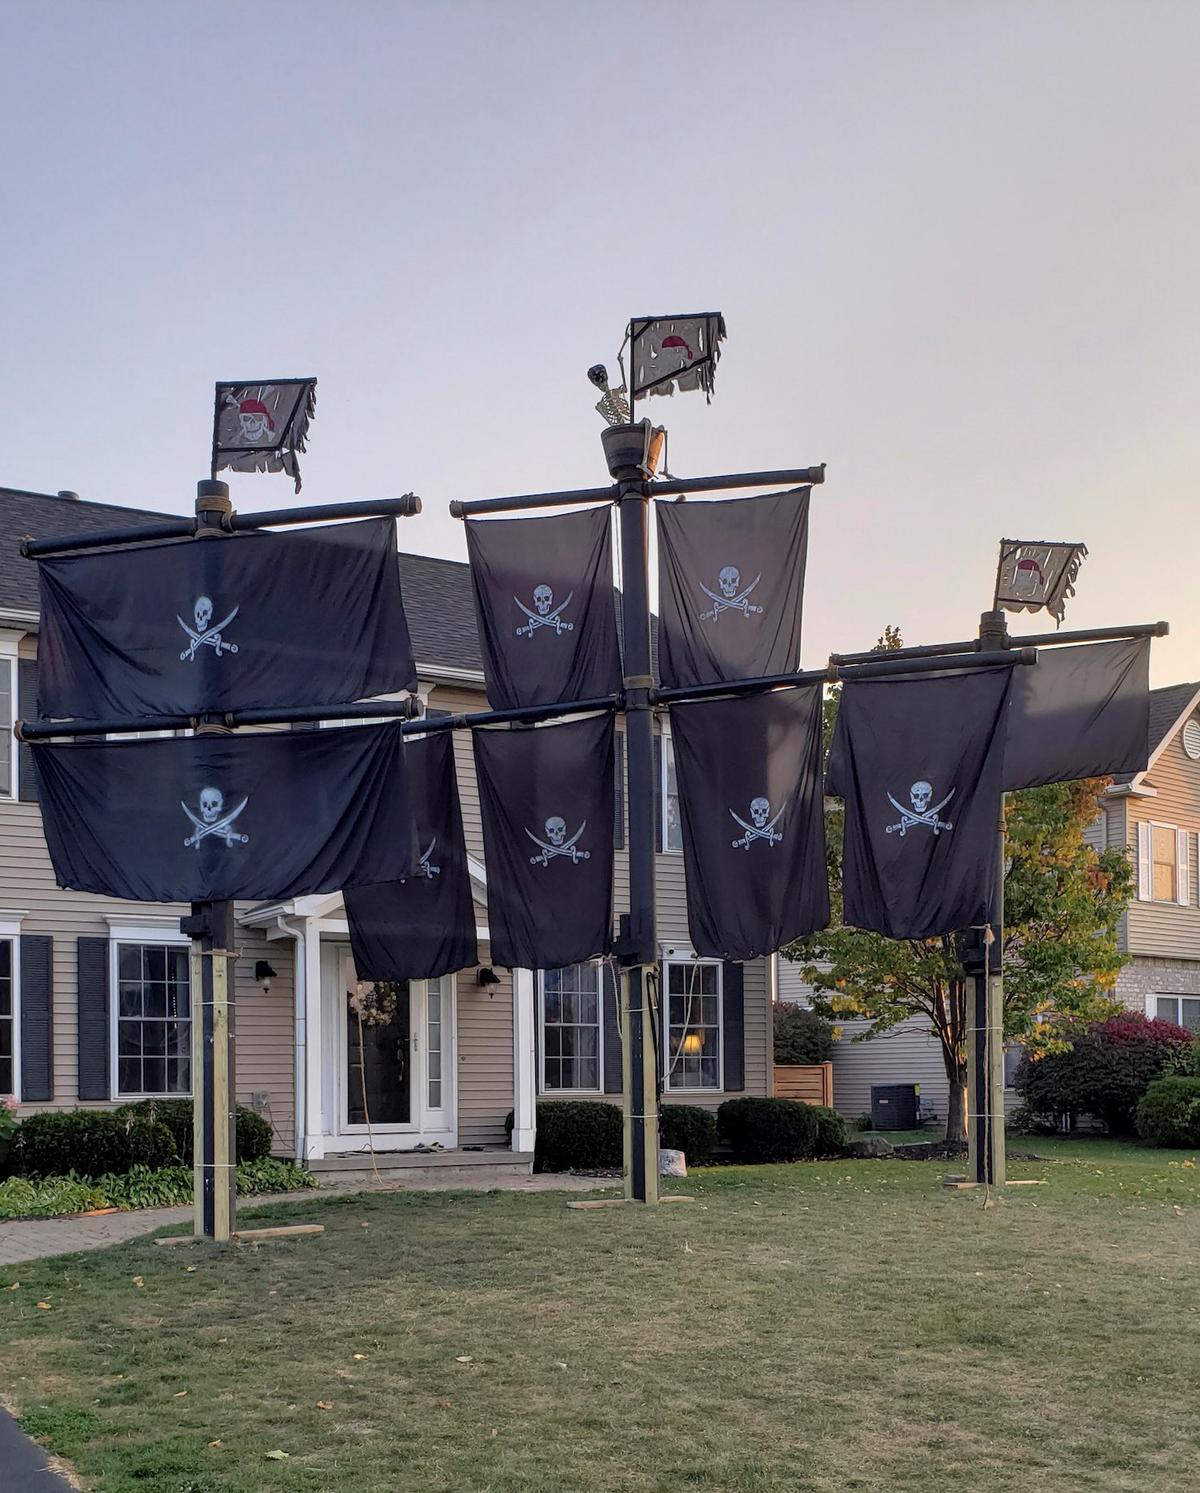 The pirate ship flags. (Caters News)